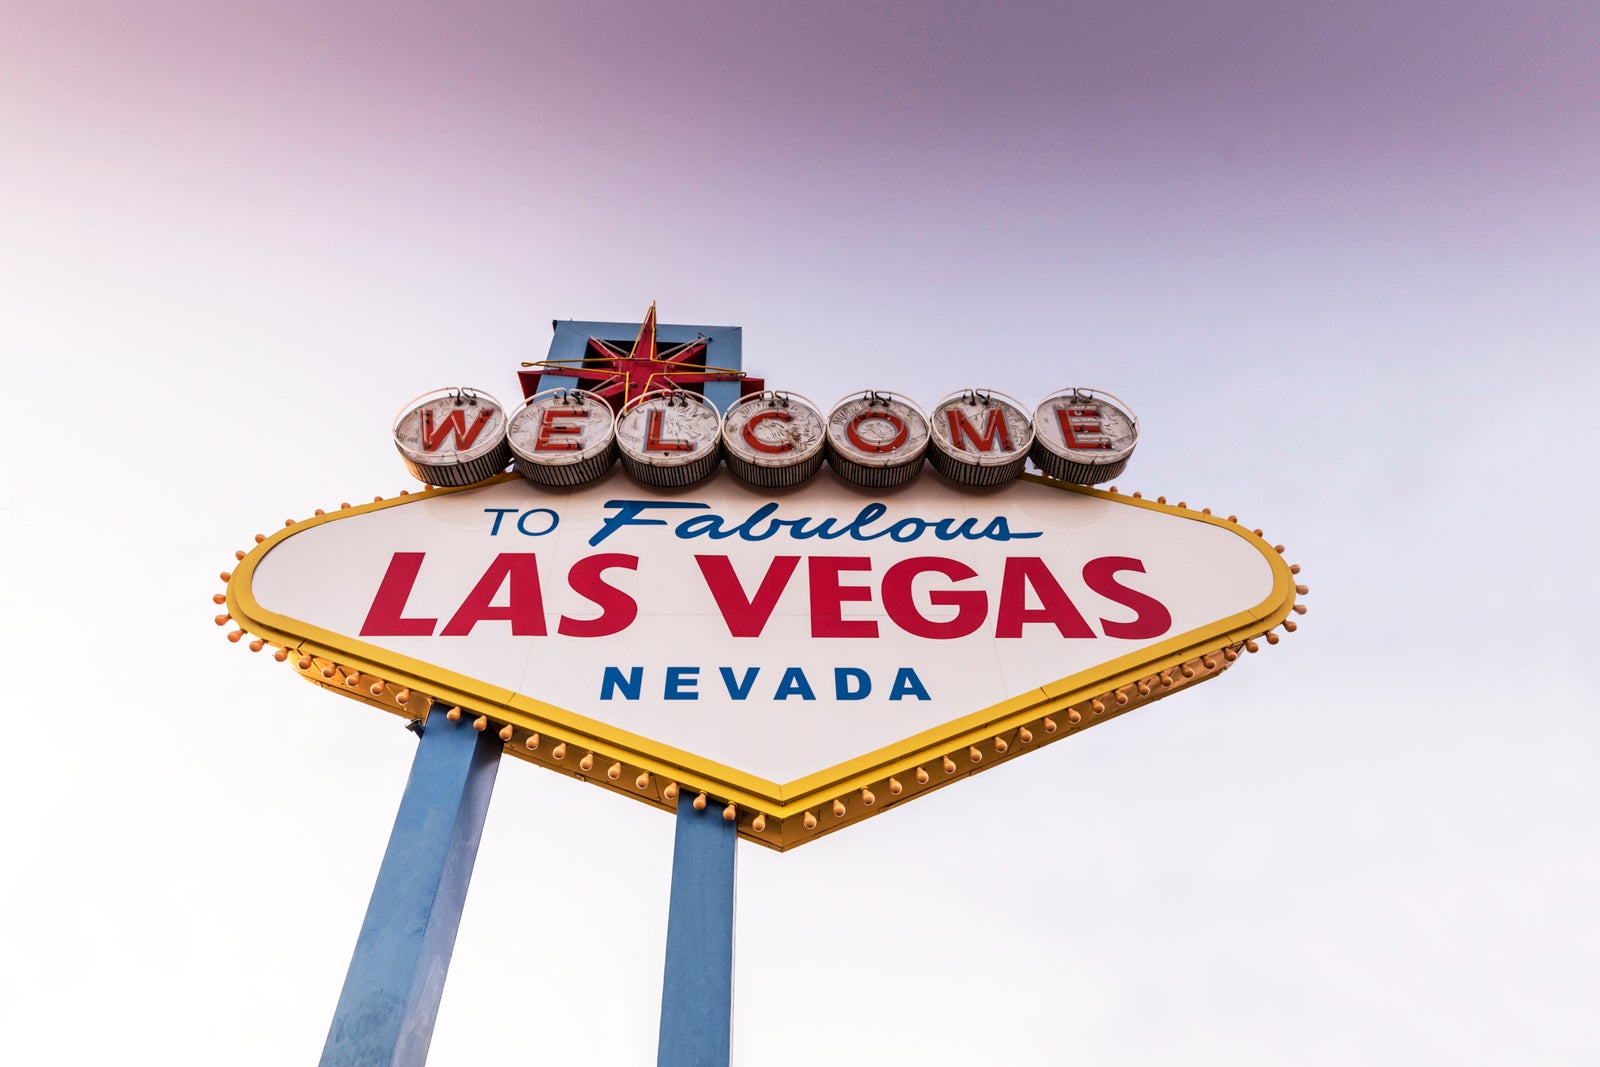 State officials issue warnings to avoid Las Vegas as COVID-19 cases surge - The Points Guy